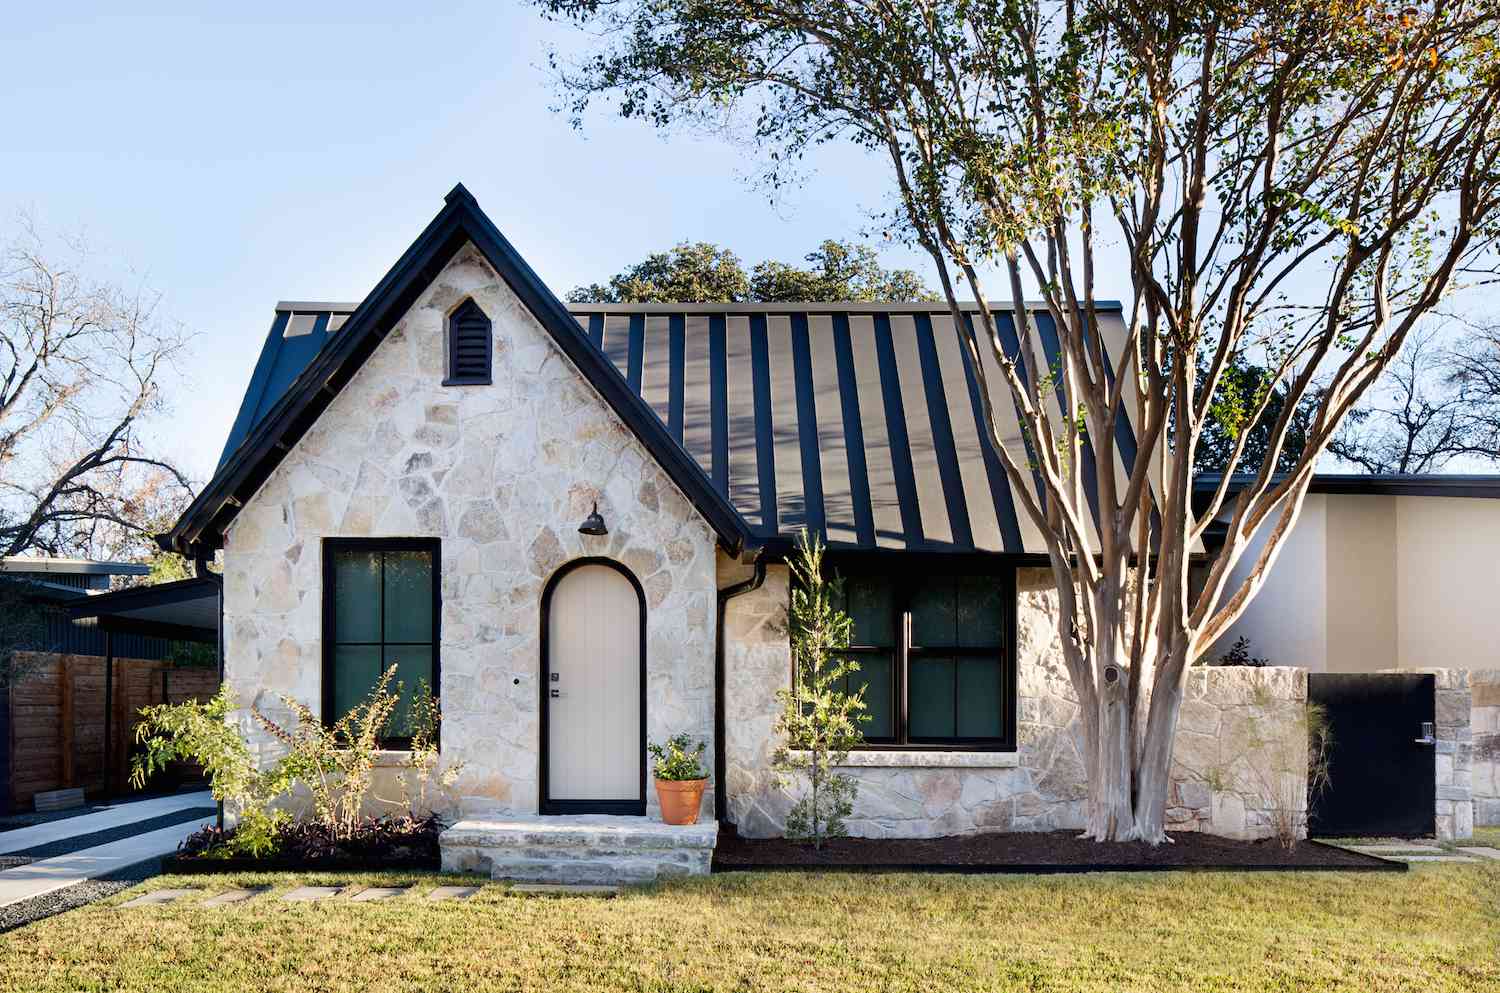 15 Cottage-Style Homes With Cozy Charm